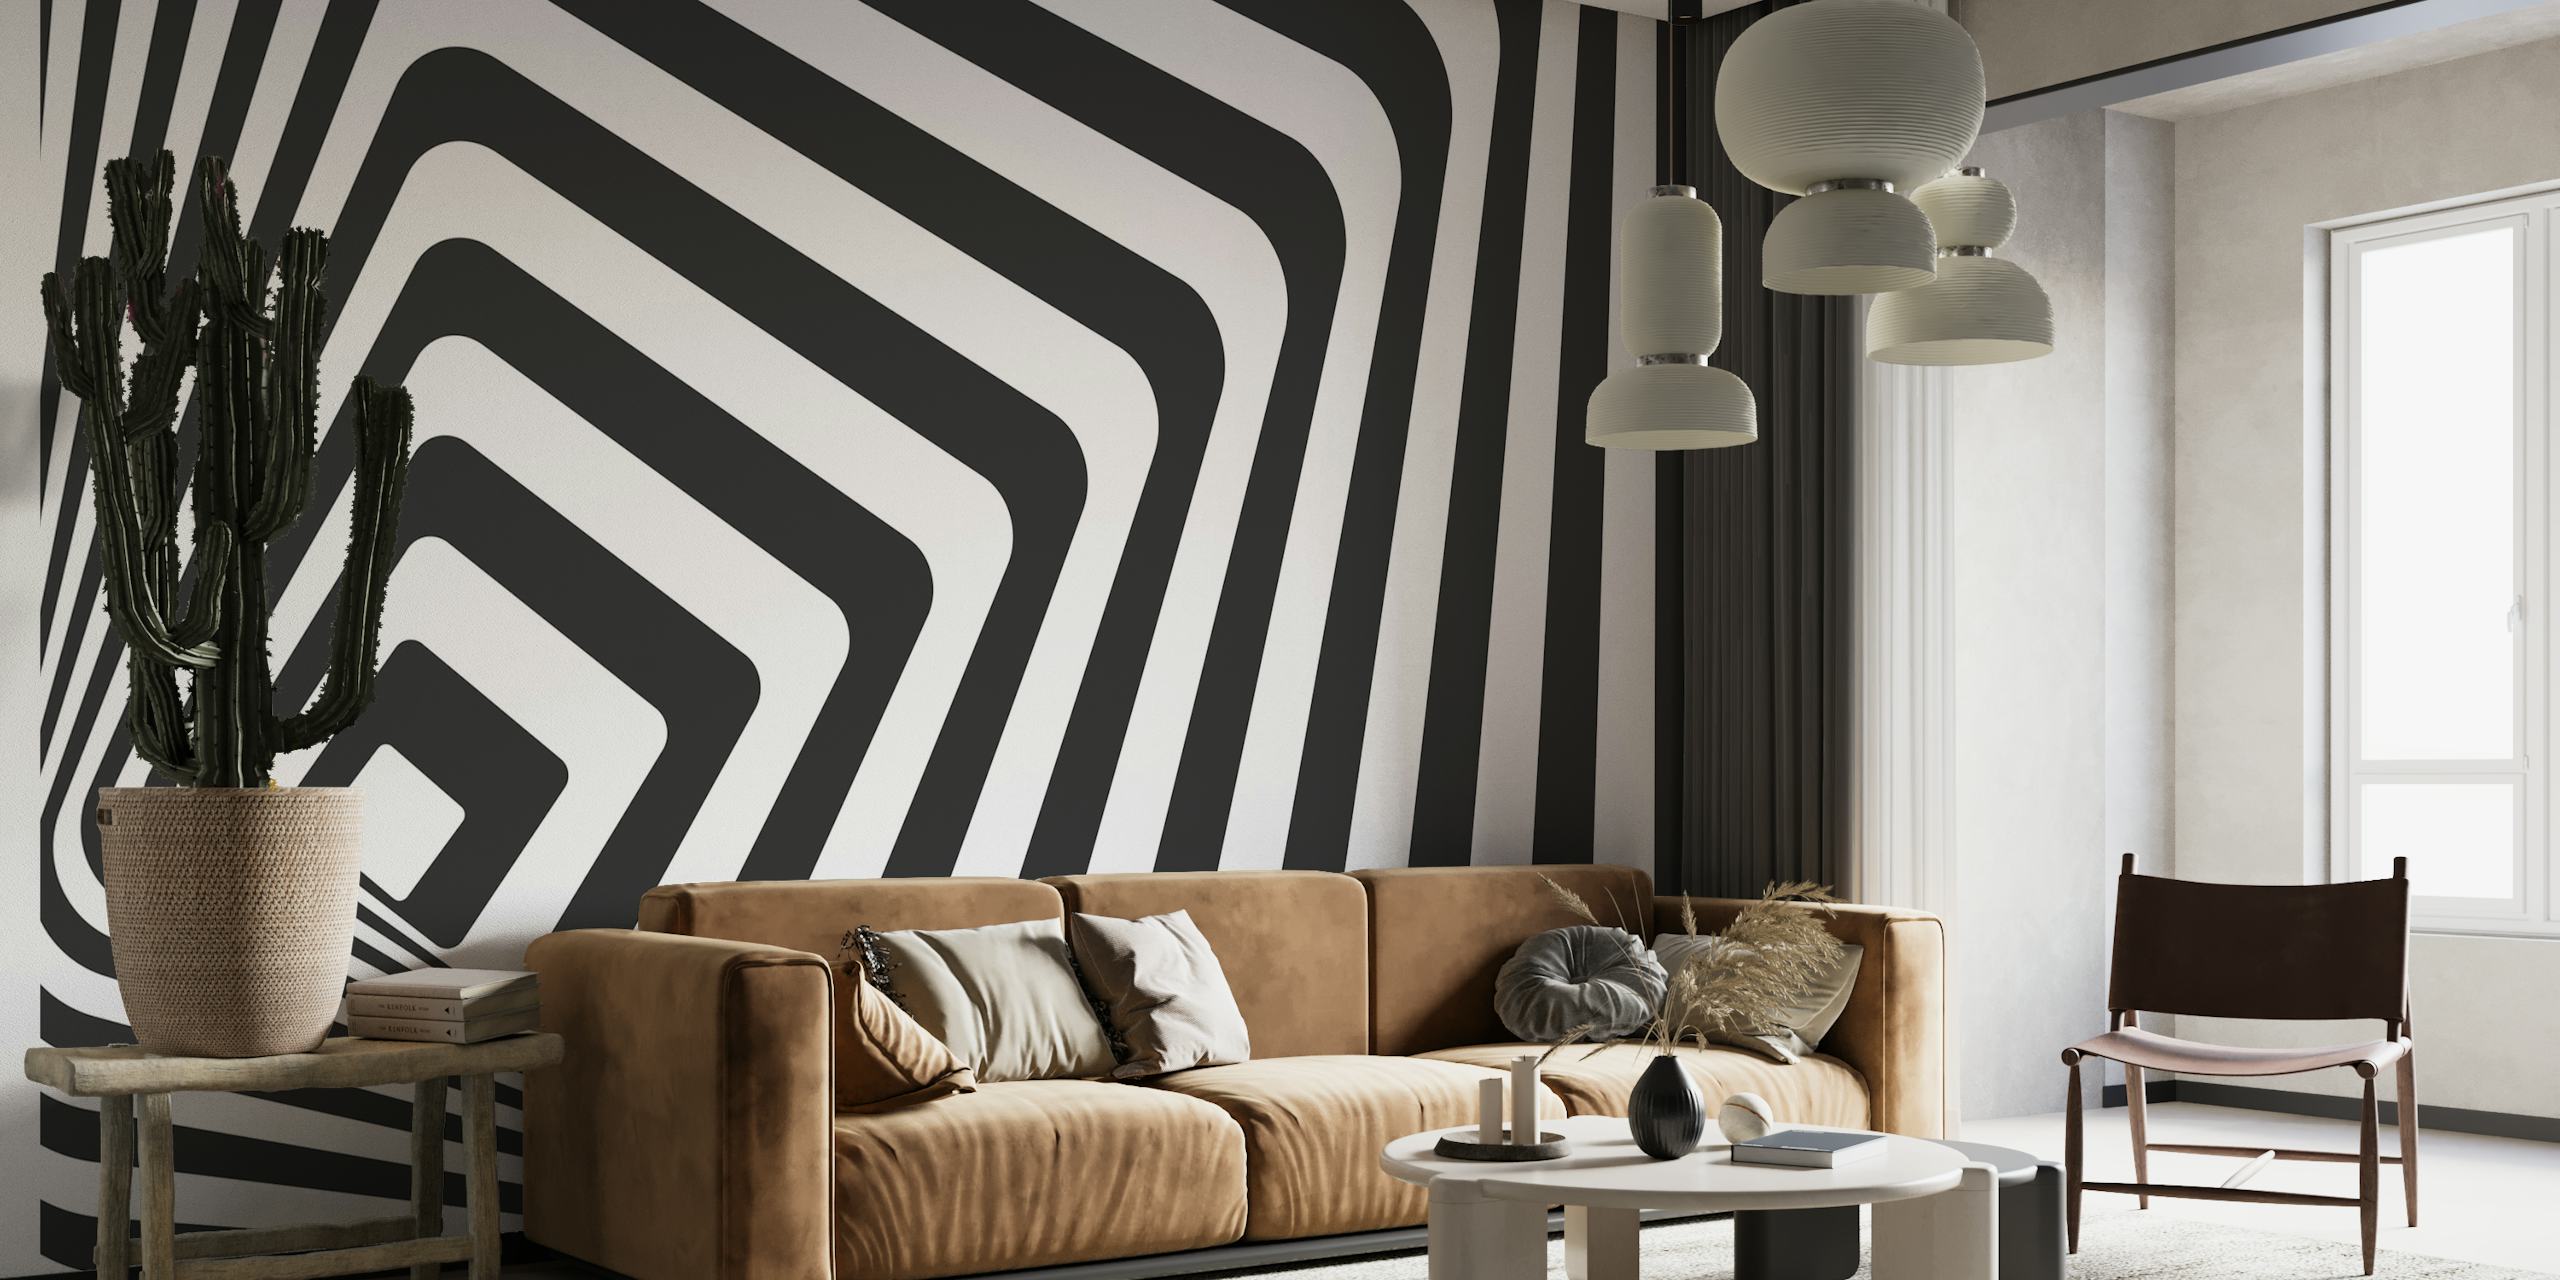 3D Op-Art Black and White wall mural with an optical illusion design